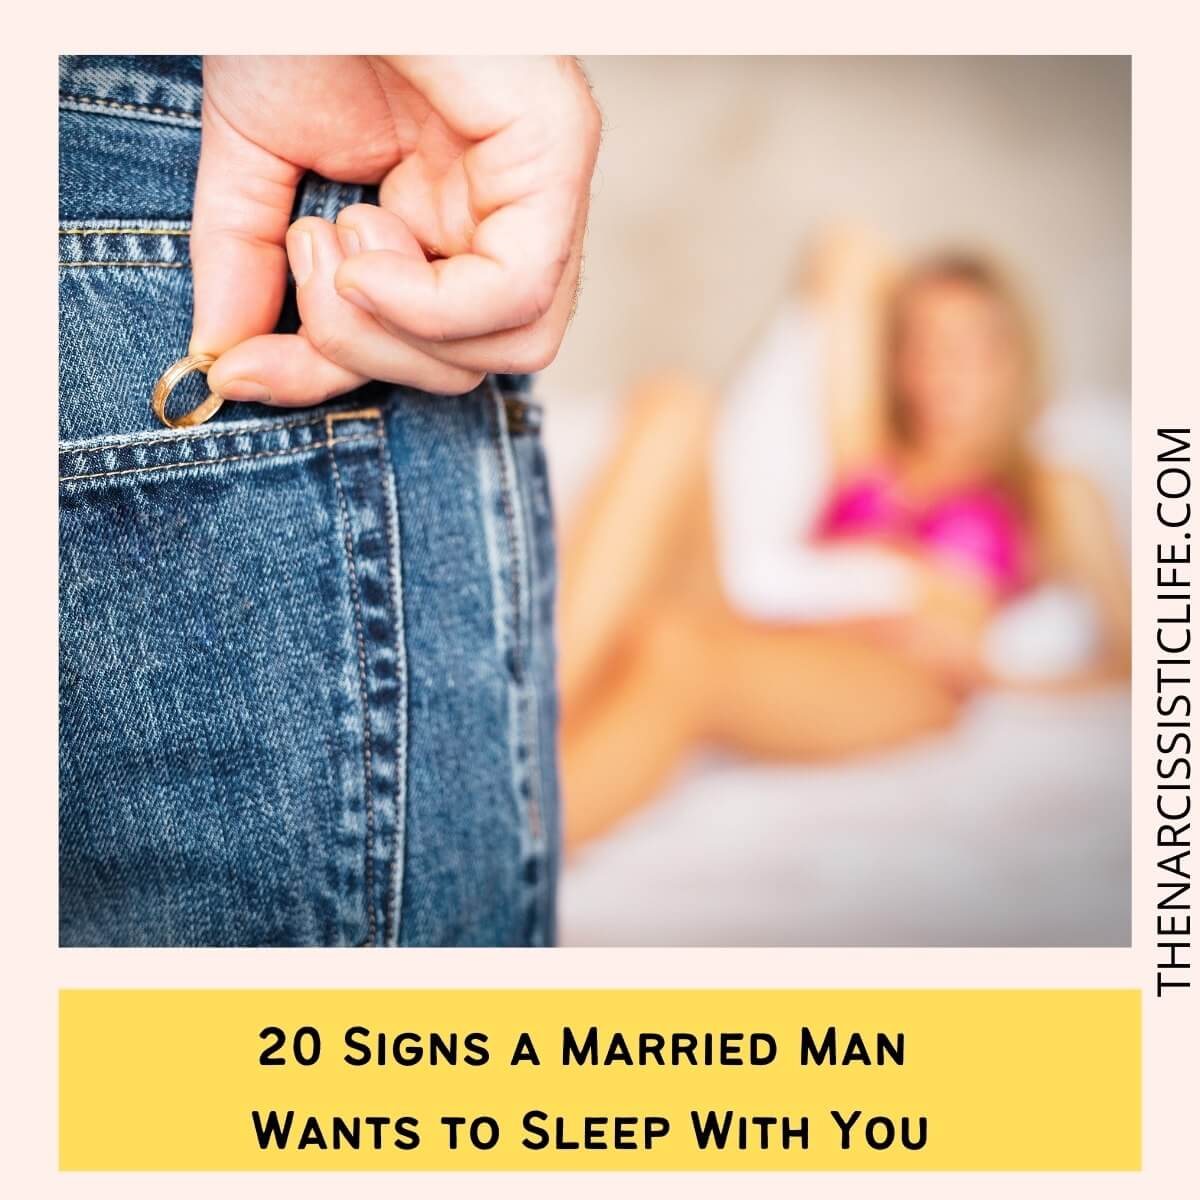 20 Sure Signs a Married Man Wants To Sleep With